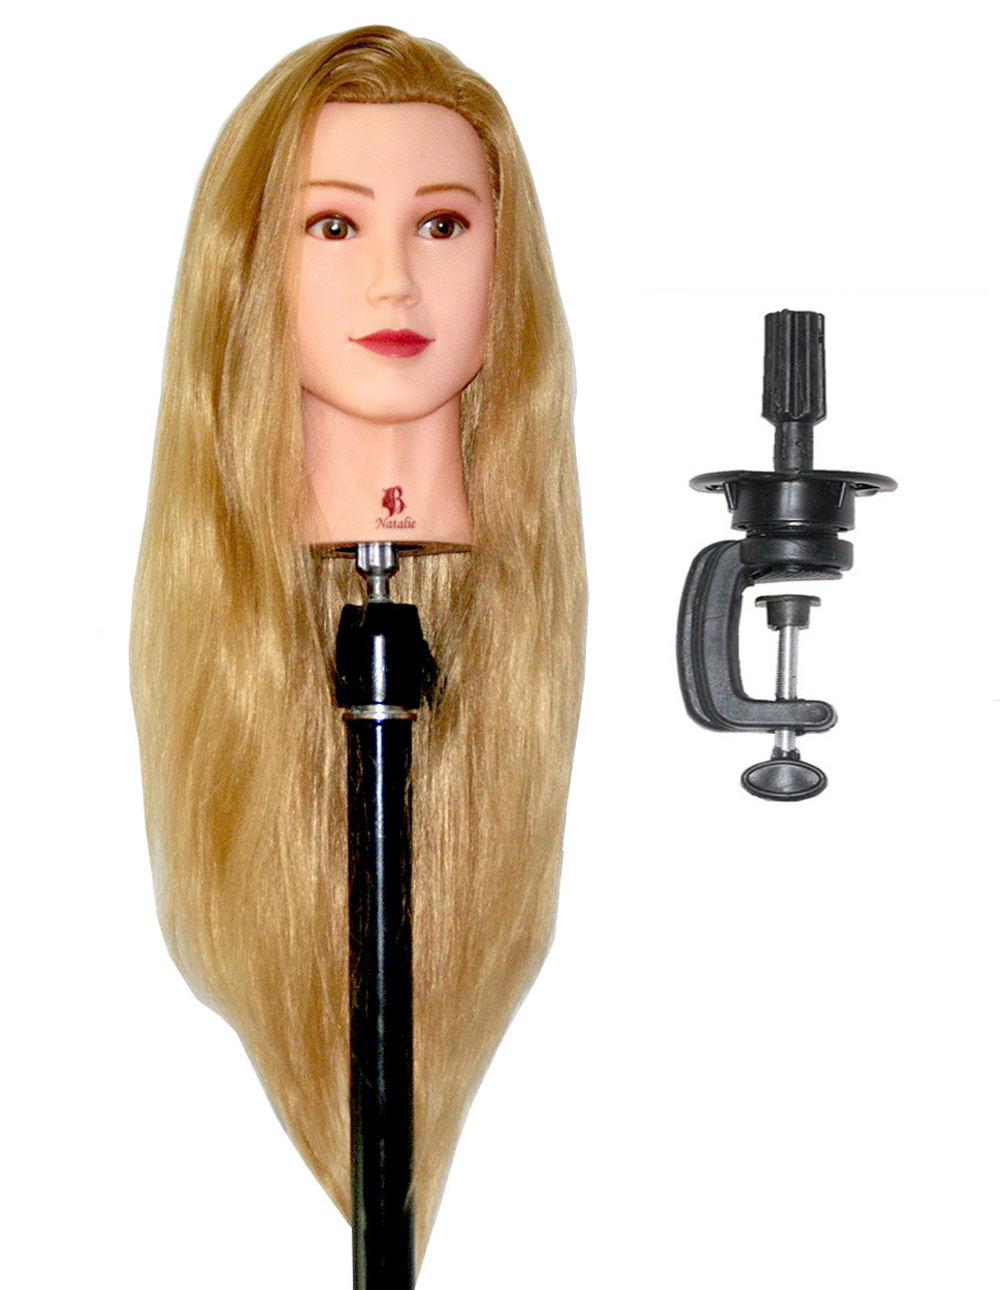 Bellrino 28 inch Cosmetology Mannequin Manikin Training Head with Synthetic Fiber - Natalie (Clamp Holder Included)